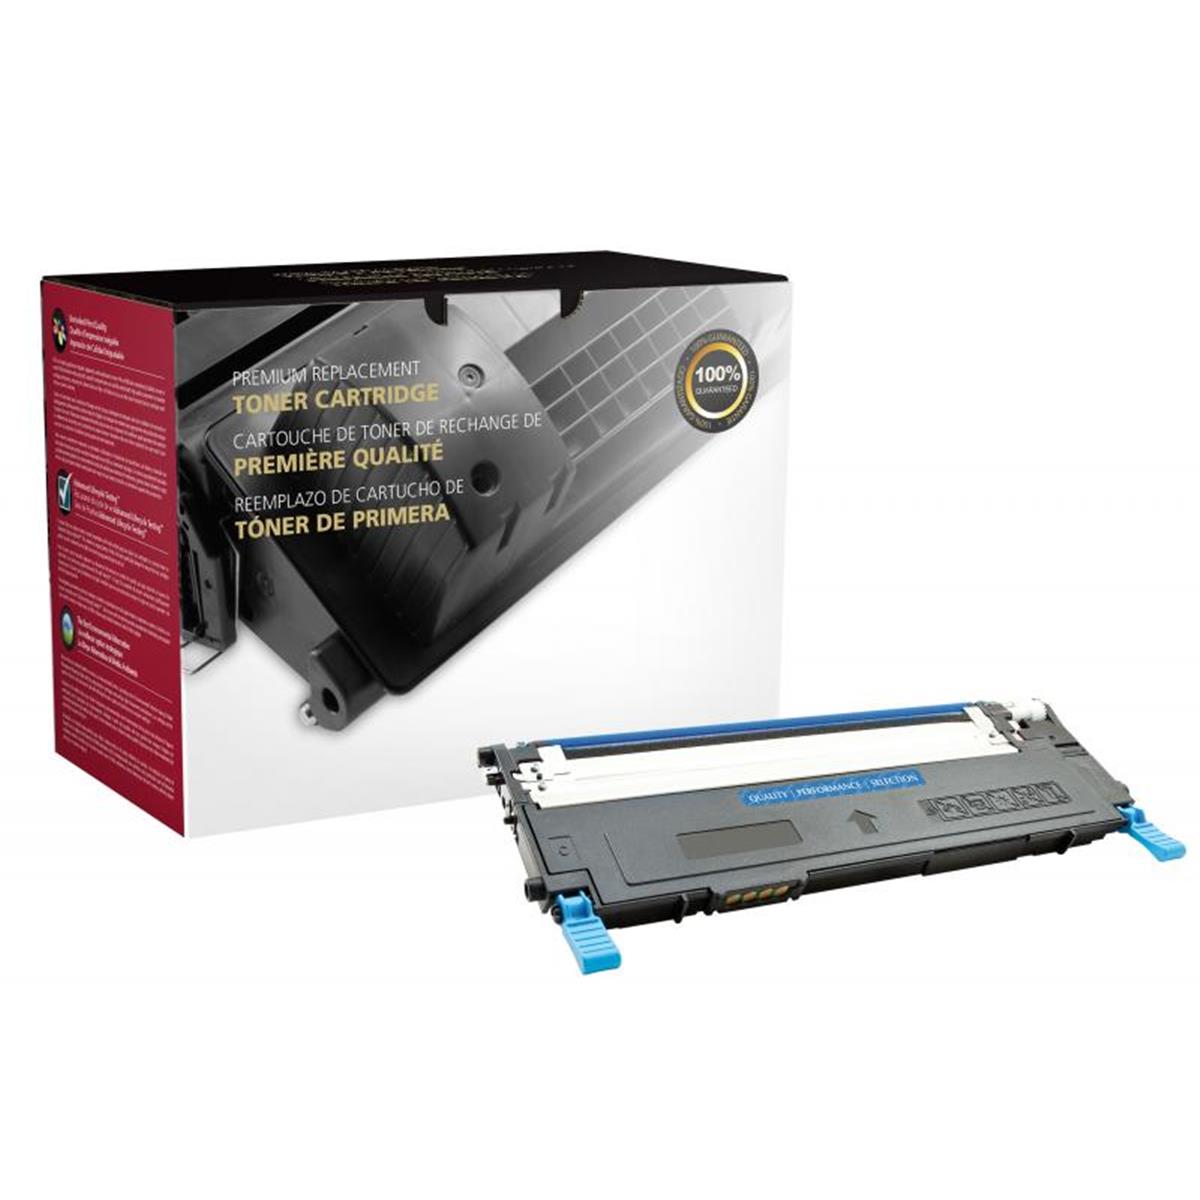 Picture of Dell 200218 Cyan Toner Cartridge for Dell 1230 & 1235